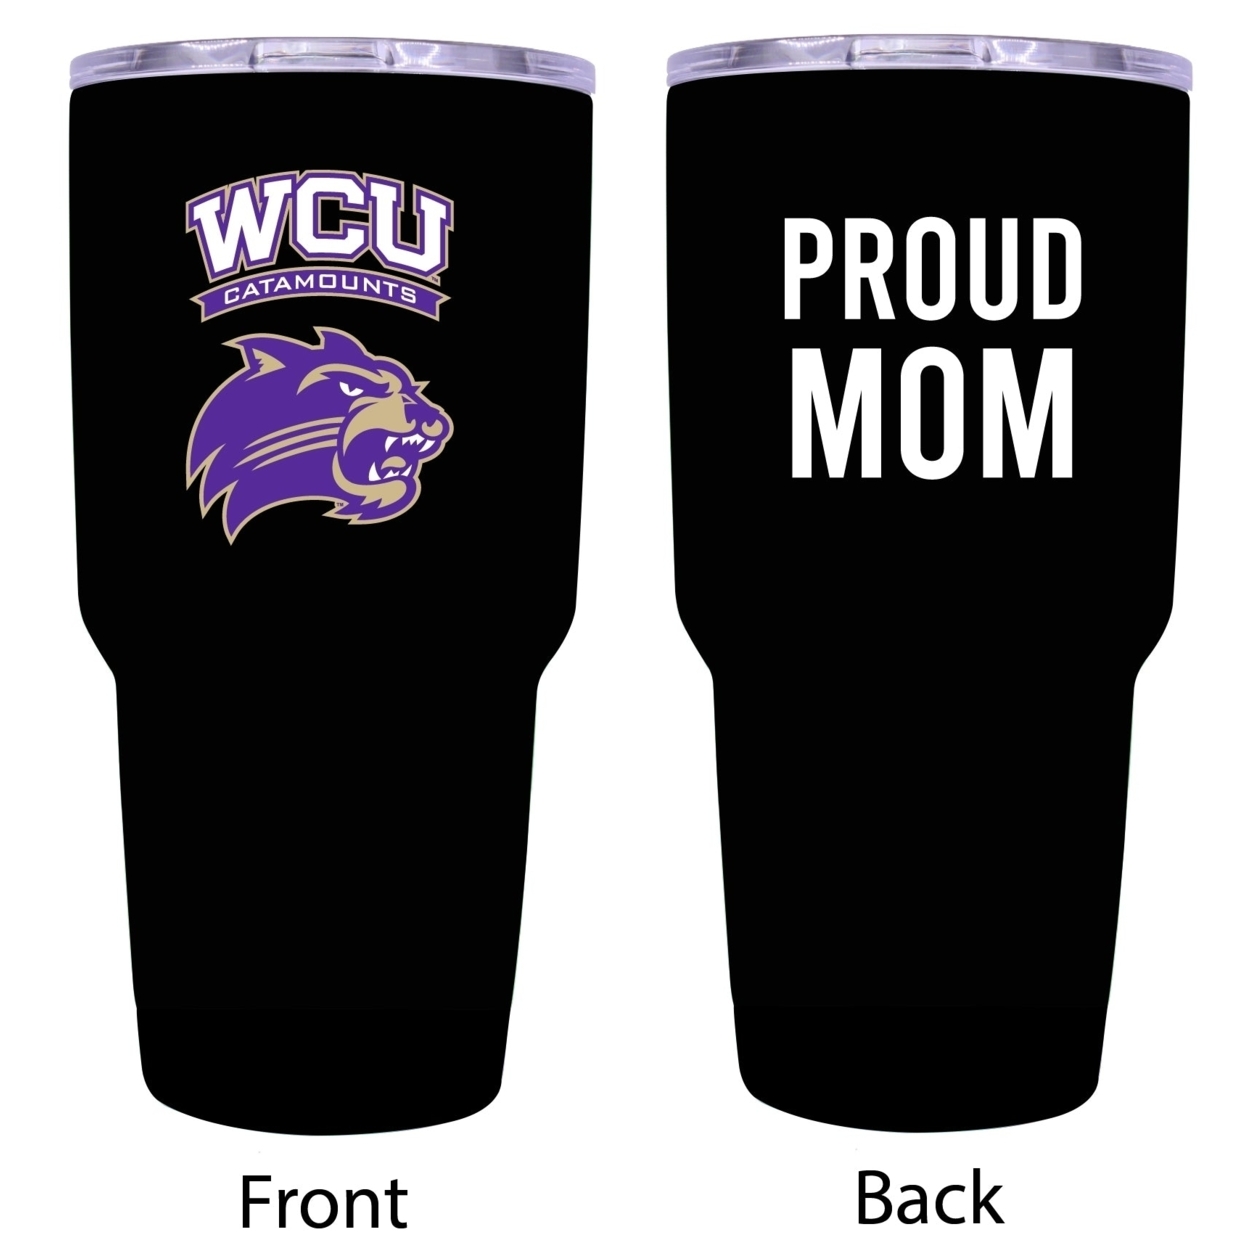 R And R Imports Western Carolina University Proud Mom 24 Oz Insulated Stainless Steel Tumblers Black.